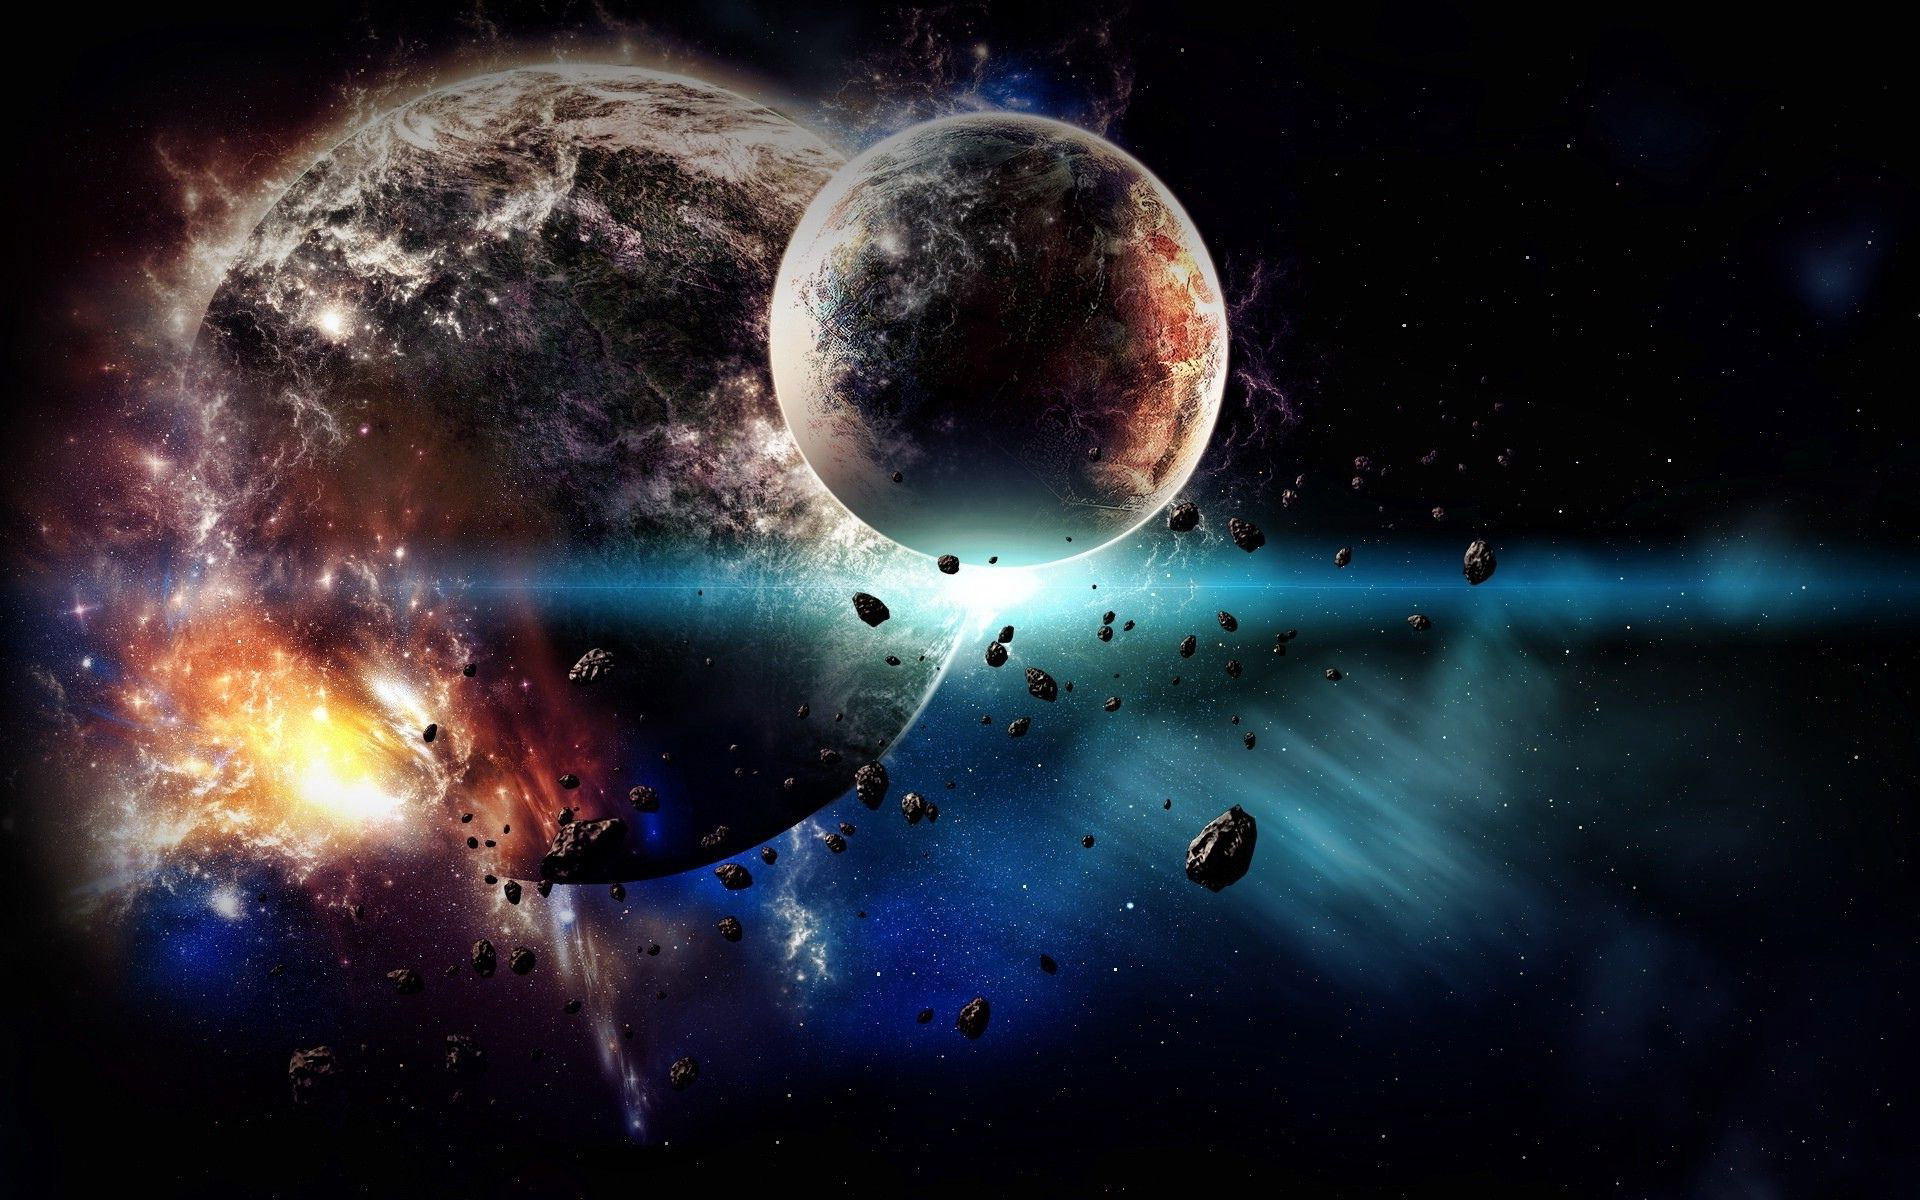 Free download Apocalyptic planet explosion wallpaper 19611 [1920x1200] for your Desktop, Mobile & Tablet. Explore Planet Wallpaper. Little Big Planet Wallpaper, HD Space Wallpaper 1080p, HD Space Wallpaper